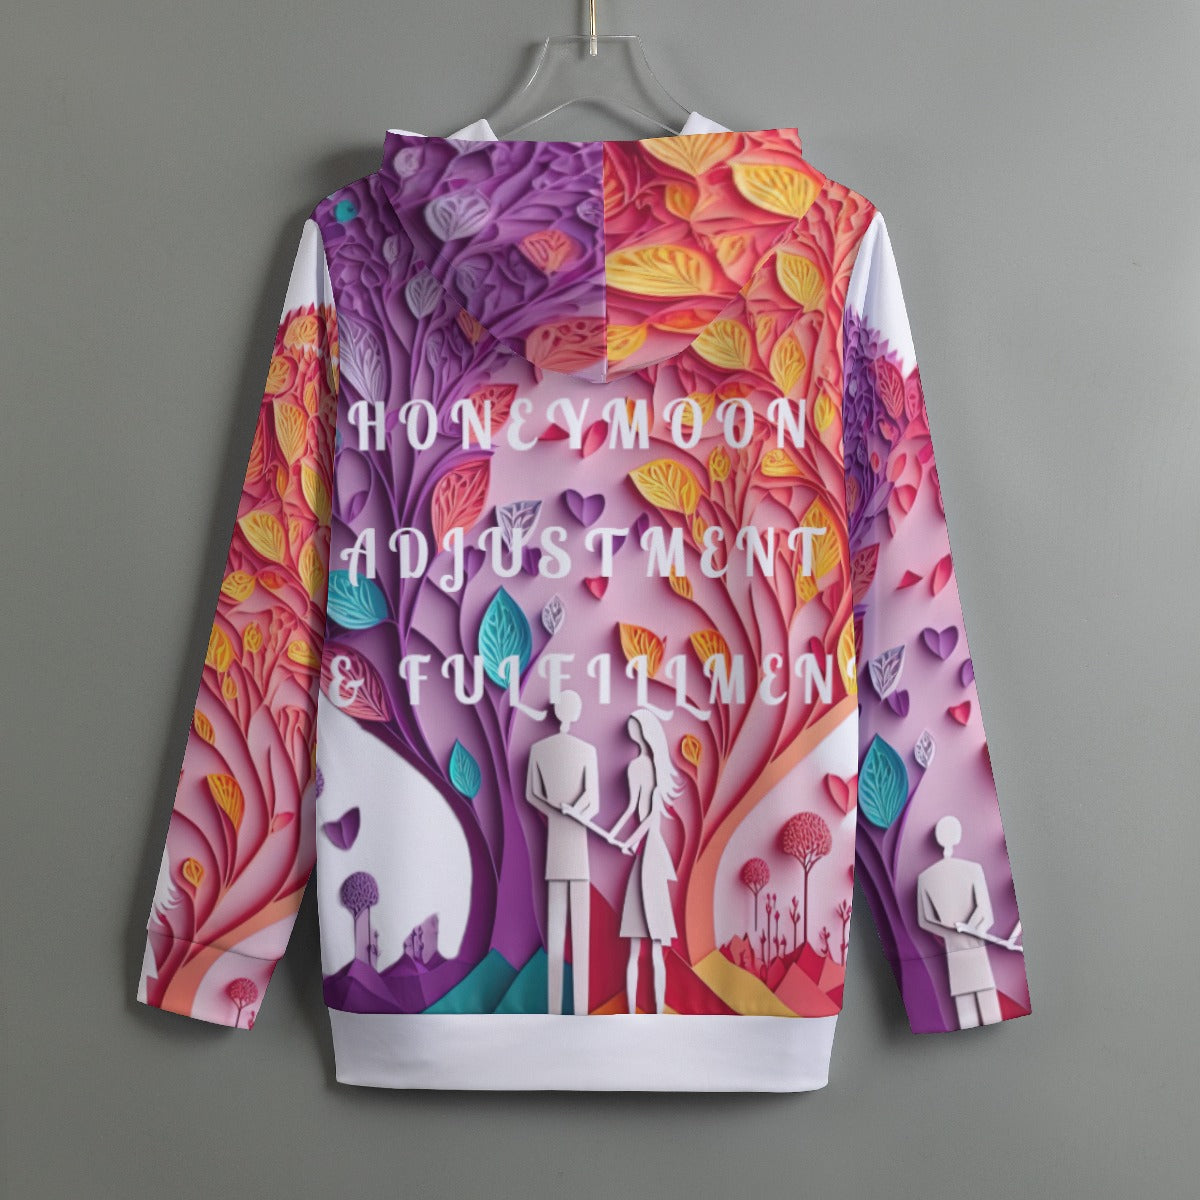 All-Over Print Women's Pullover Hoodie With Drawstring